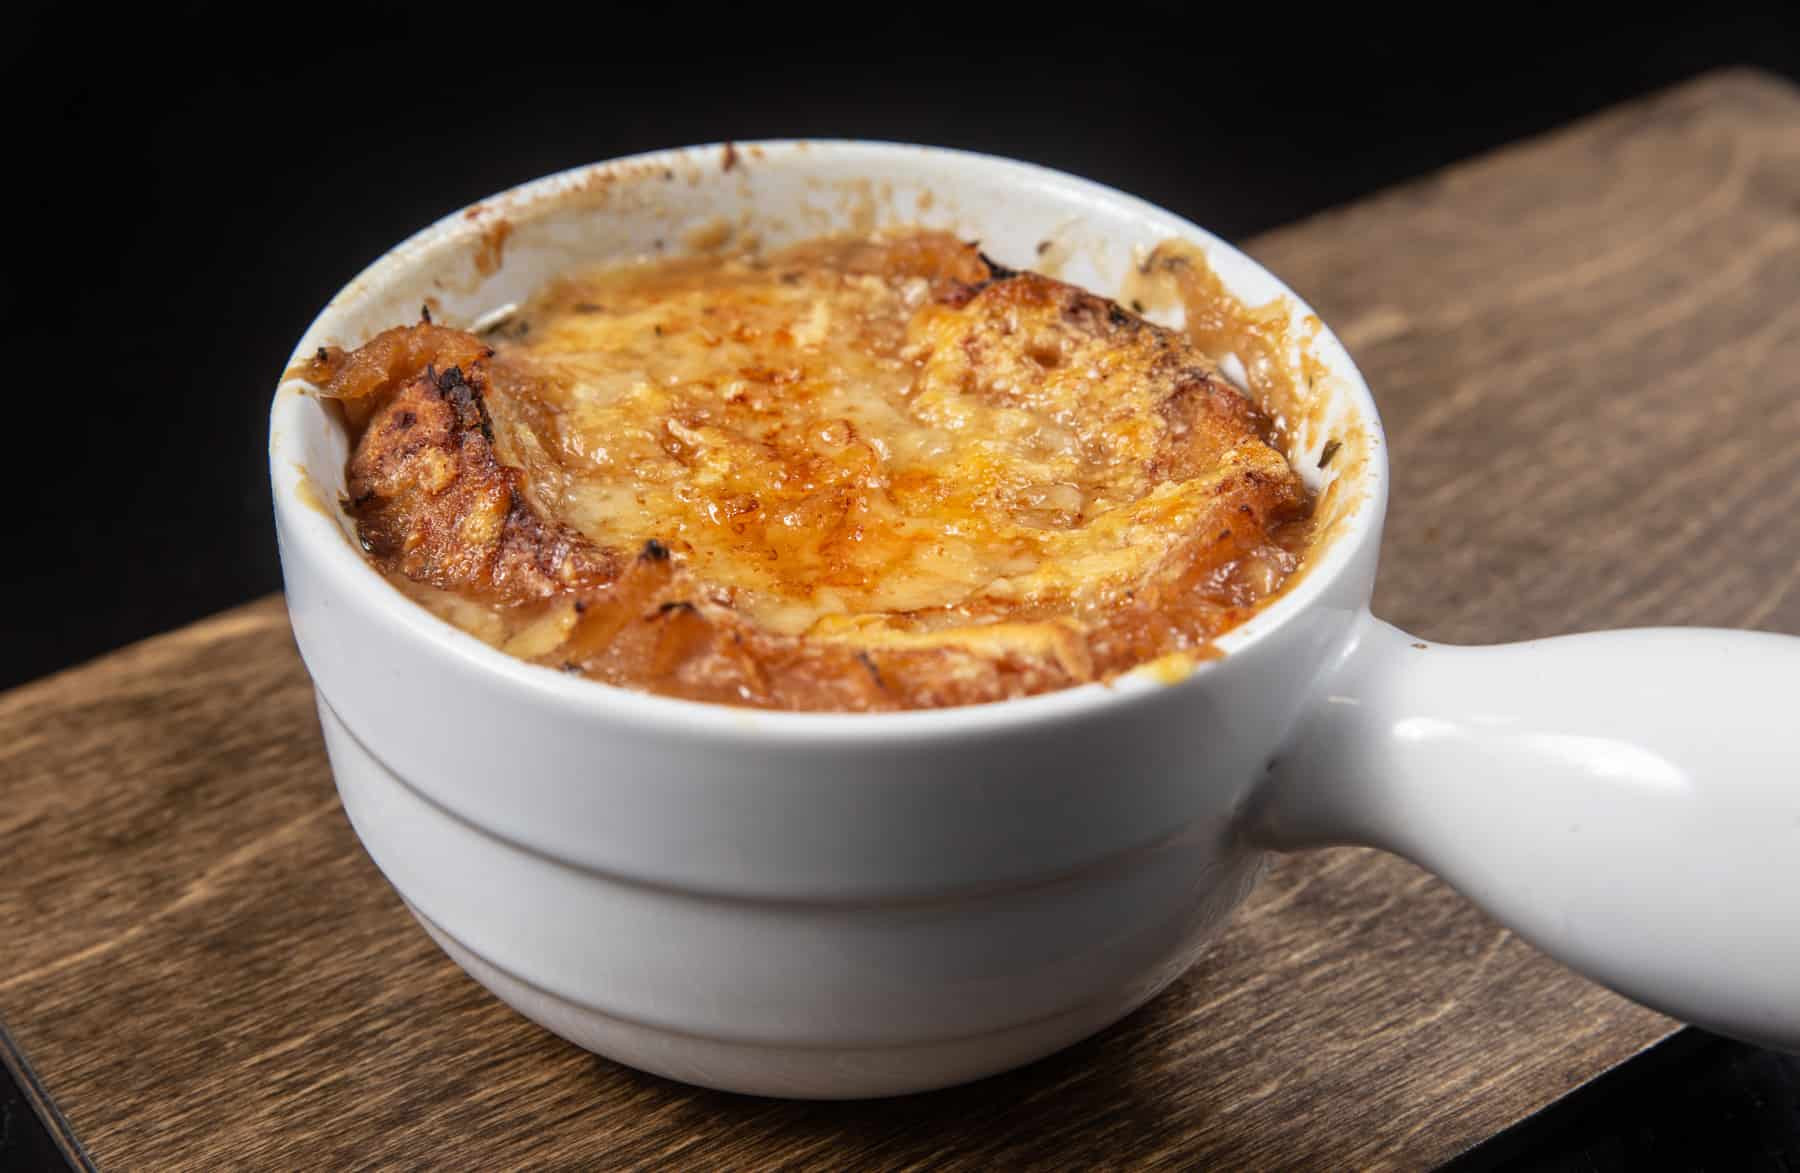 Pressure Cooker French Onion Soup
 Instant Pot French ion Soup